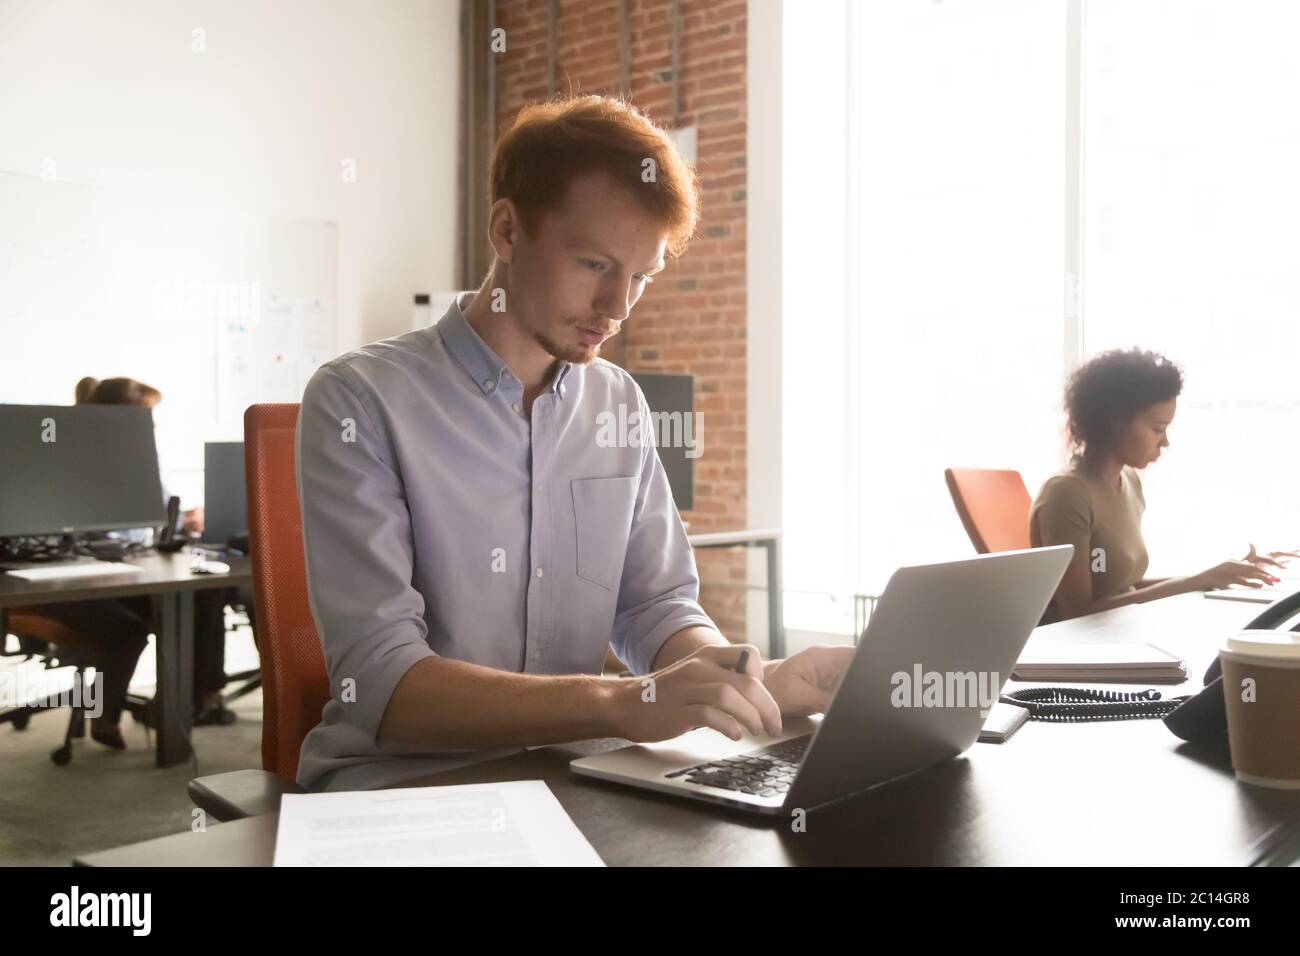 Busy young employee intern using laptop, working with documents Stock Photo